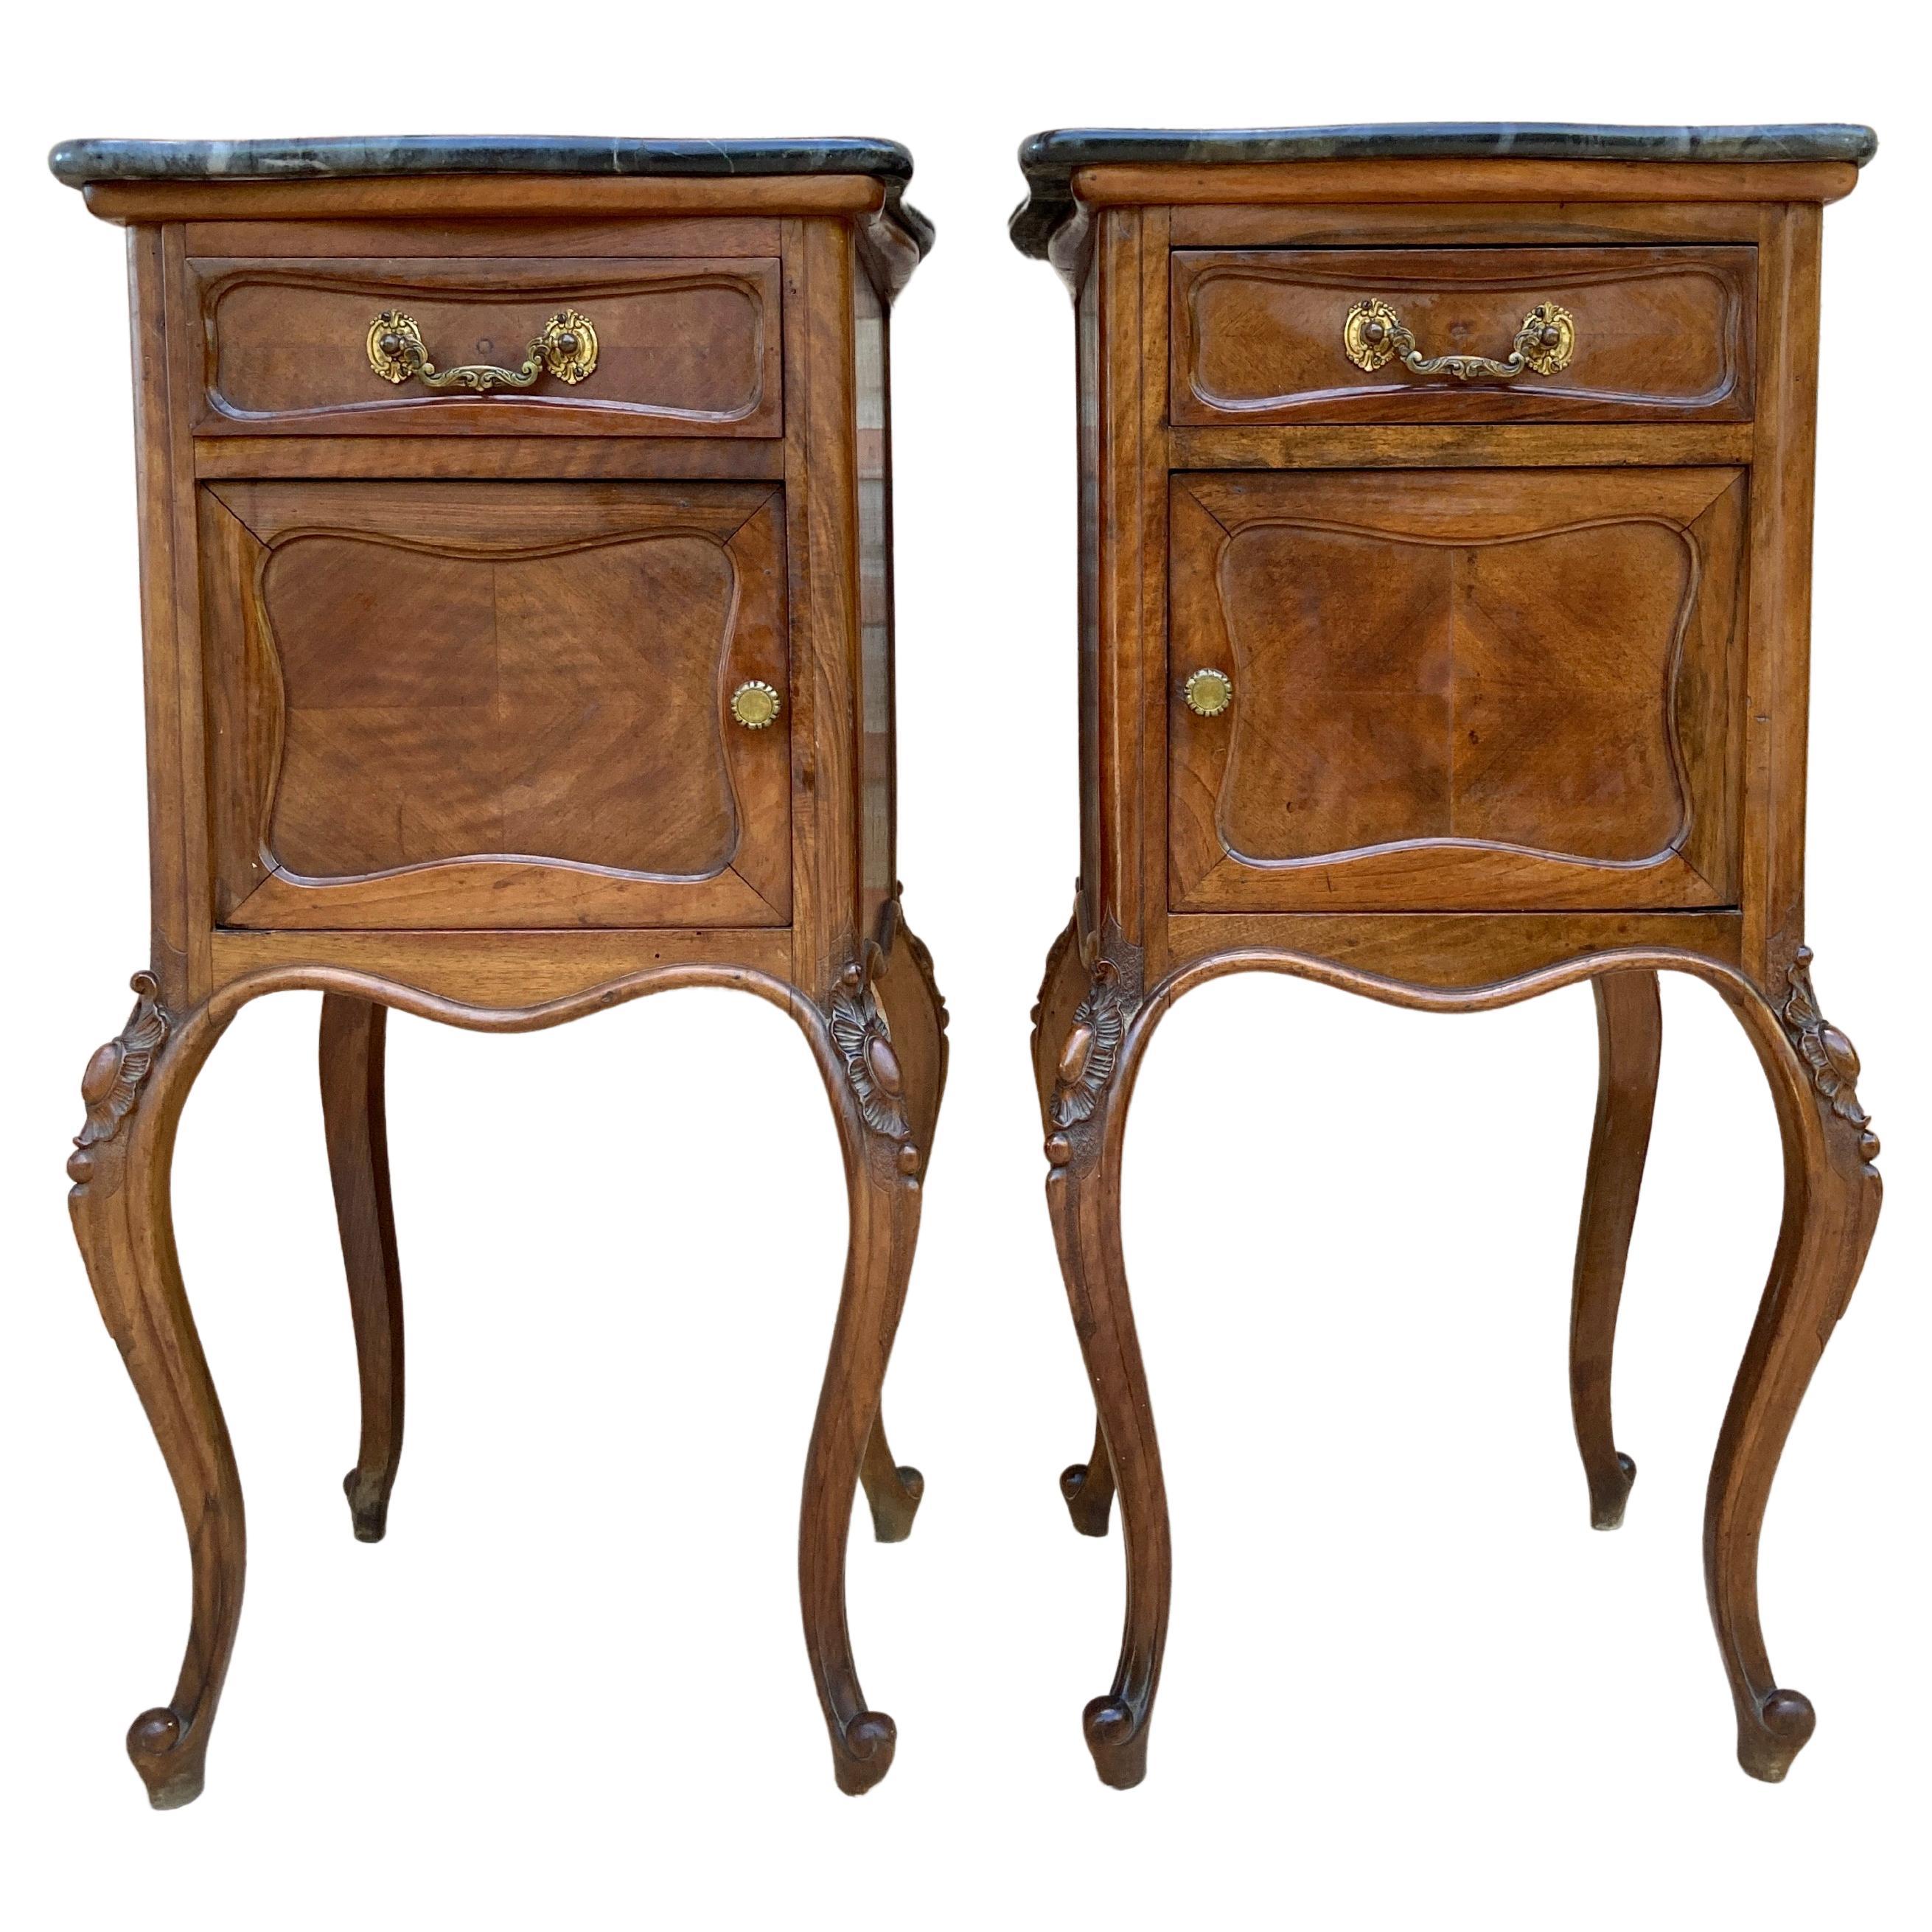 Louis XV Style Walnut Nightstands with Marble Top, 1930s, Set of 2